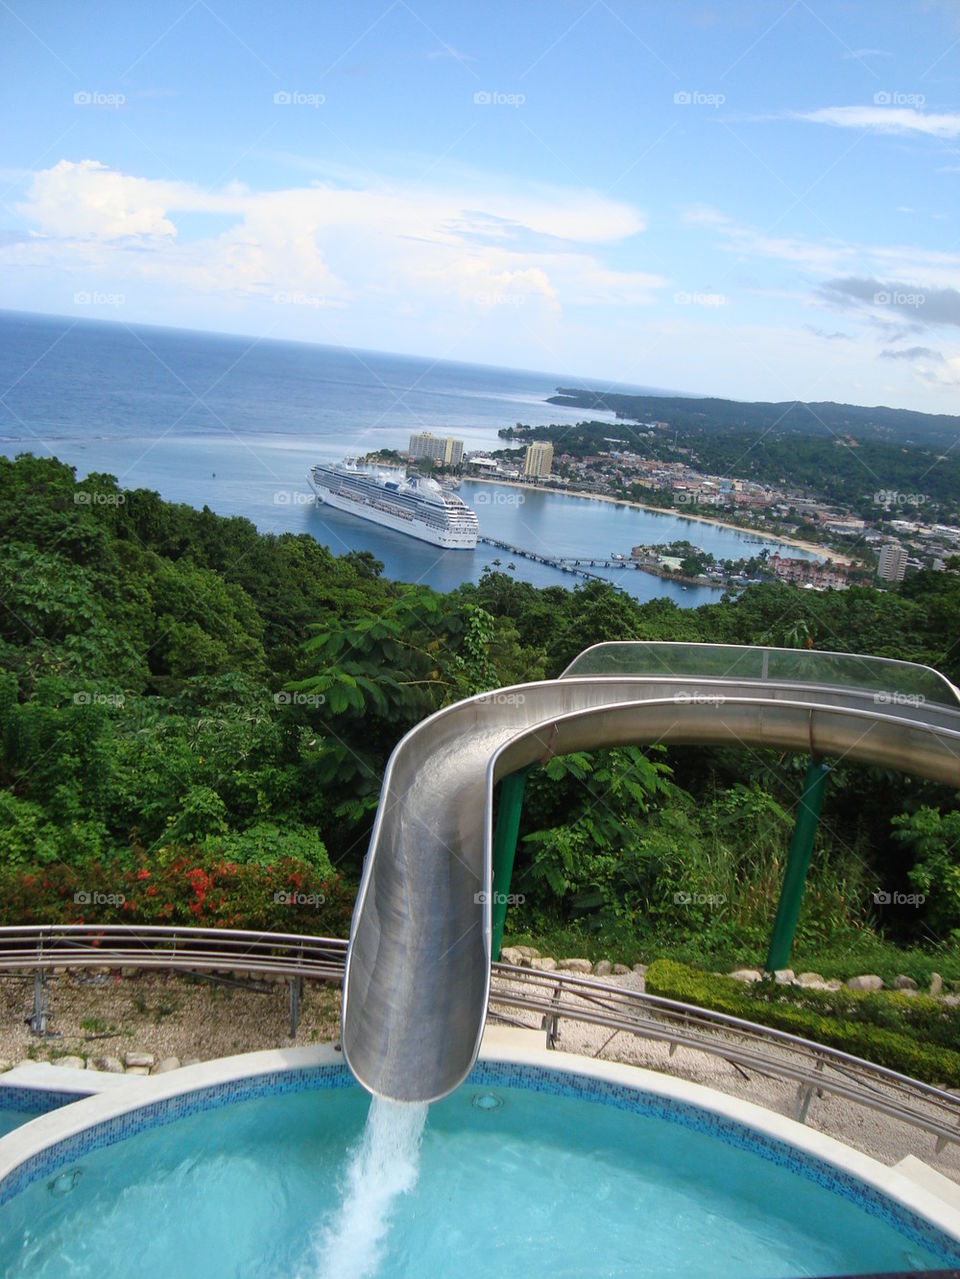 water slide and cruise ship